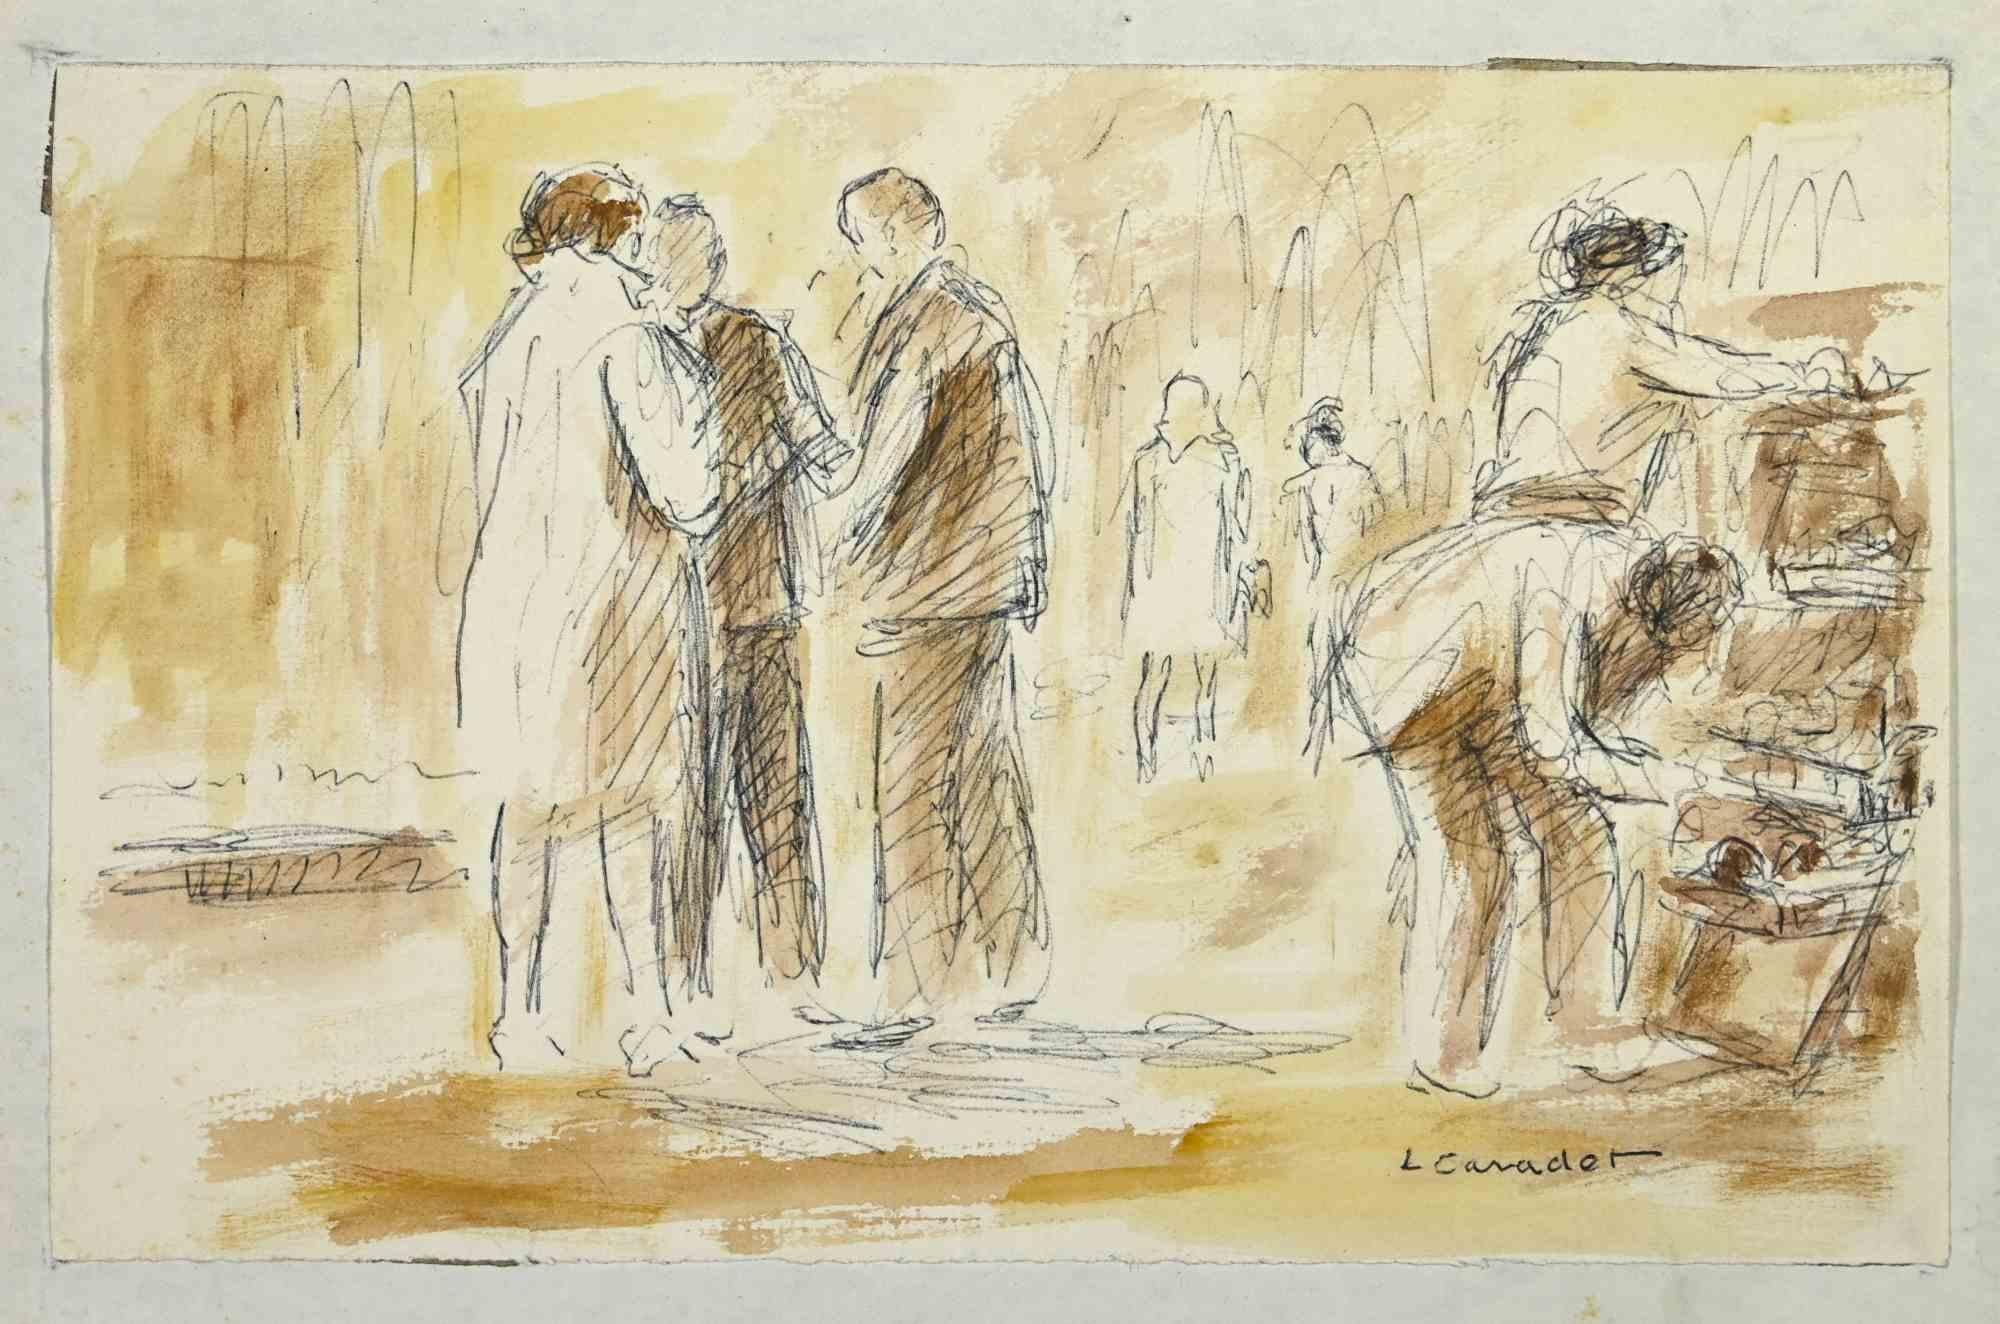 The Market Square is a drawing, realized in early-20th century , by the French post-impressionist painter and illustrator Lucie Caradek (1880-1936).

Mixed media on paper. Hand Signed on the right margin.

The work is glued on cardboard. Total